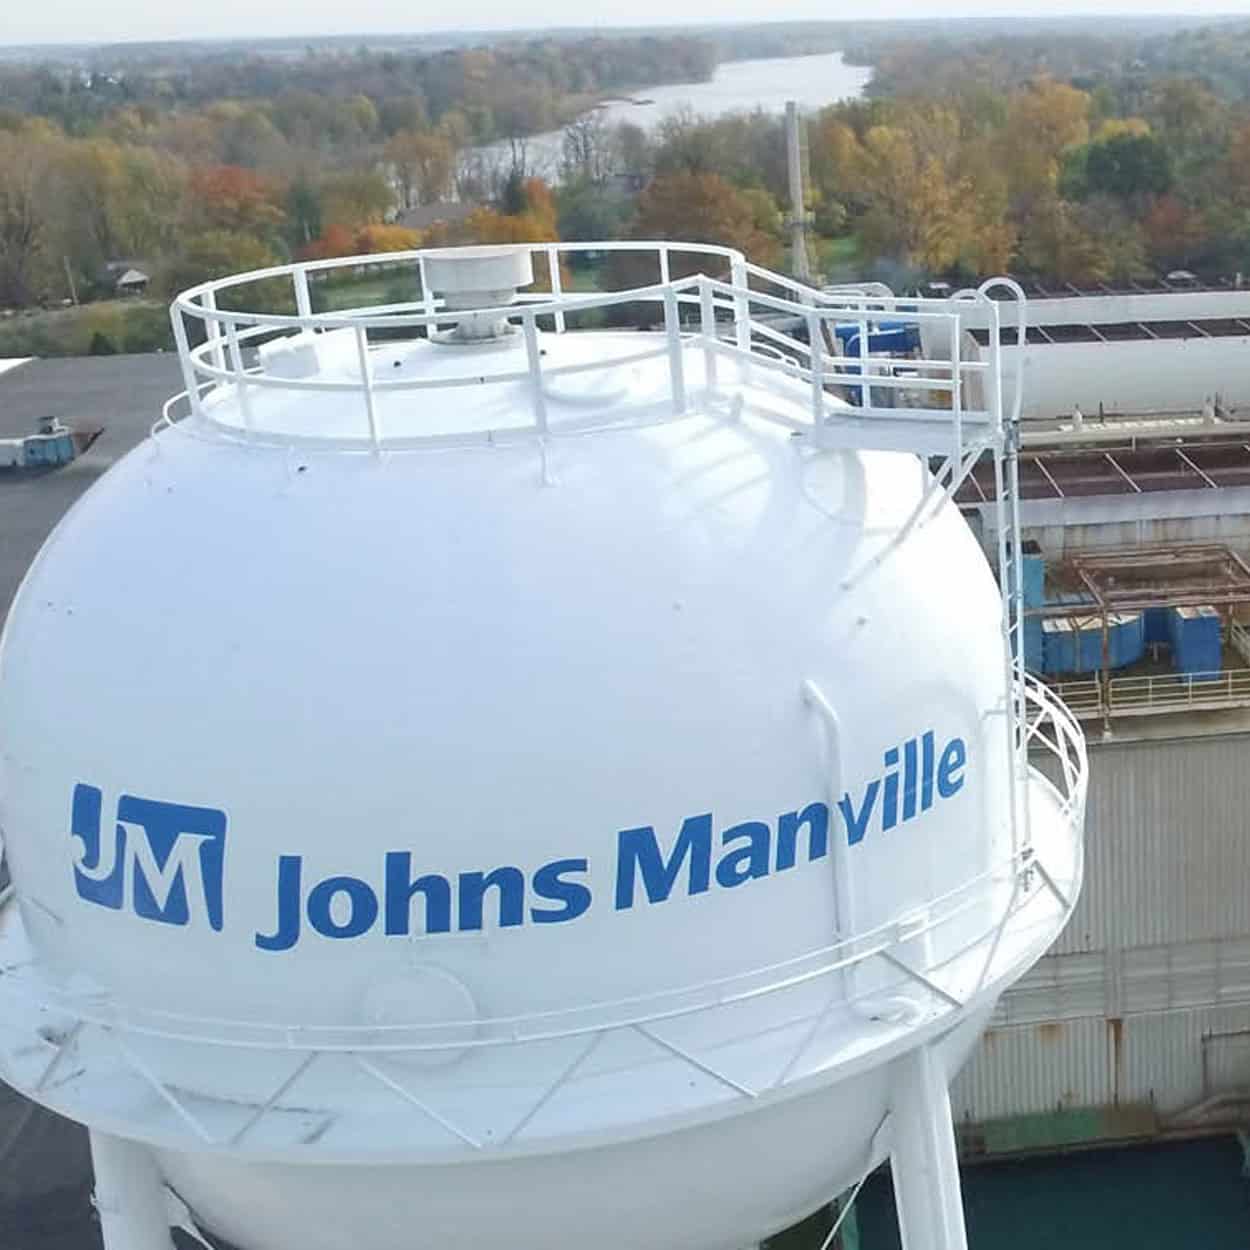 Johns Manville water tower picture for portfolio